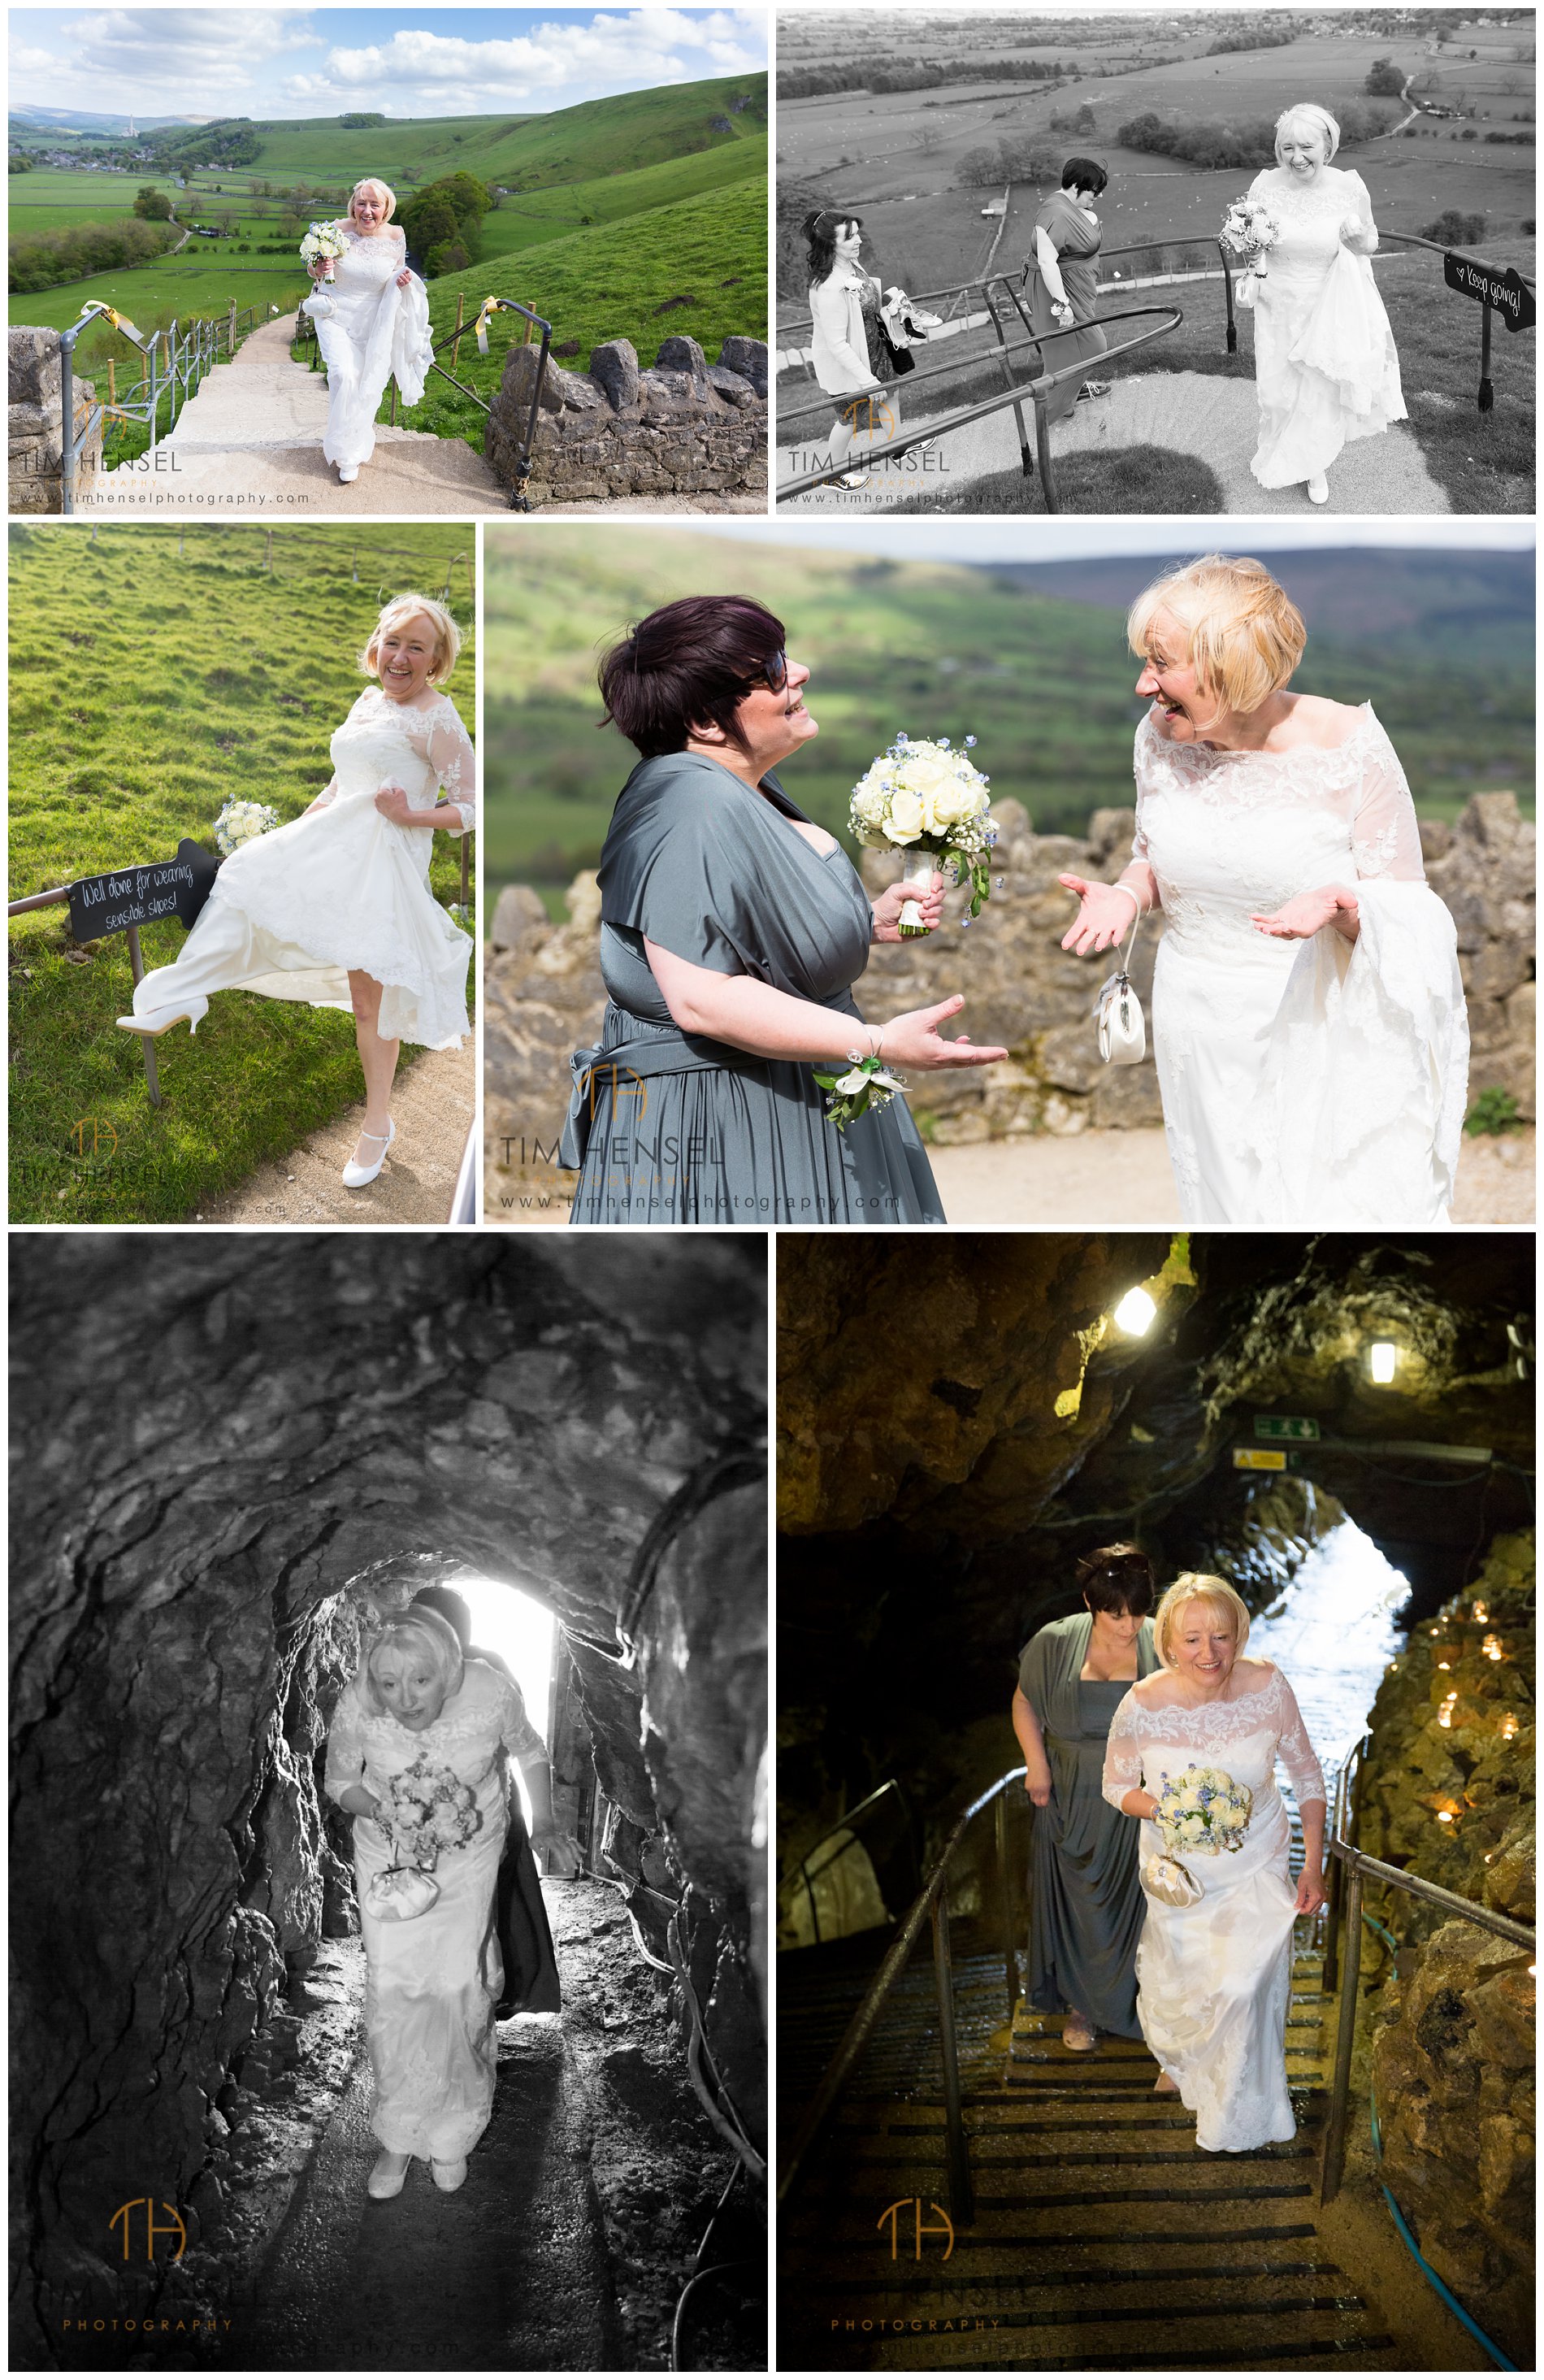 The Bride ascends the hill to her wedding in a Castleton Cavern